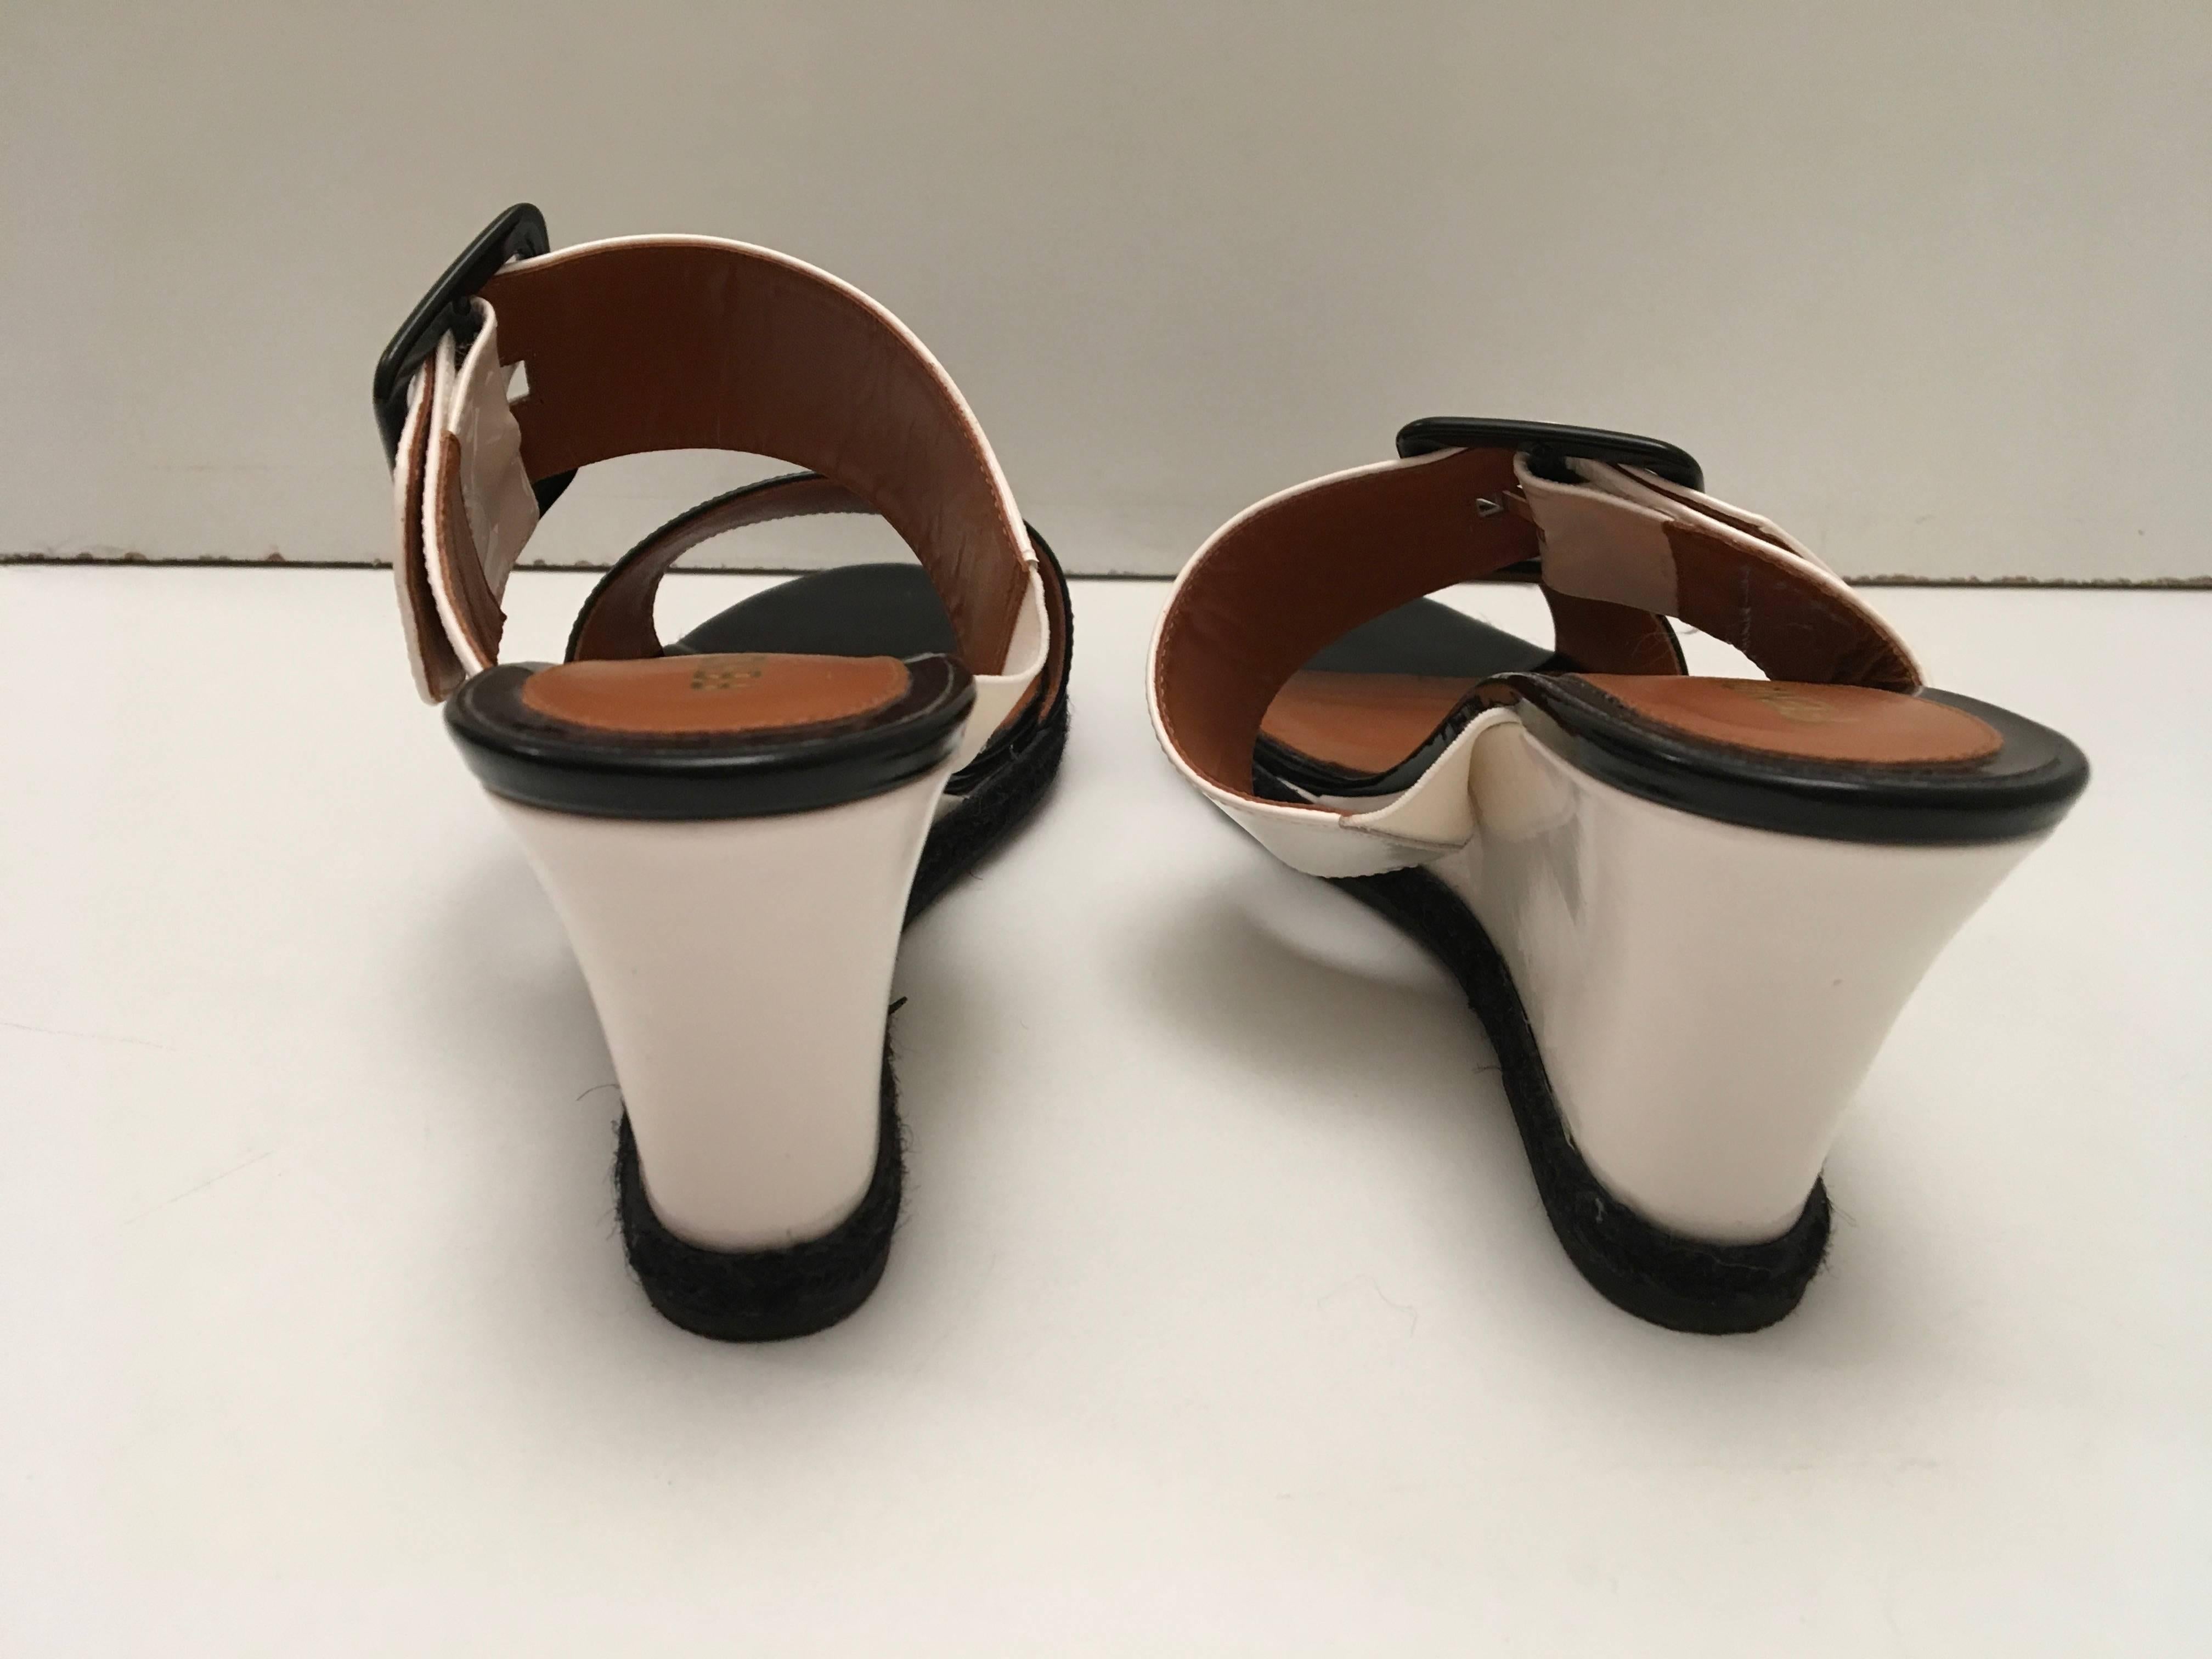 Fendi Patent Leather Wedges - Black and White - Size 37.5 In New Condition For Sale In Boca Raton, FL